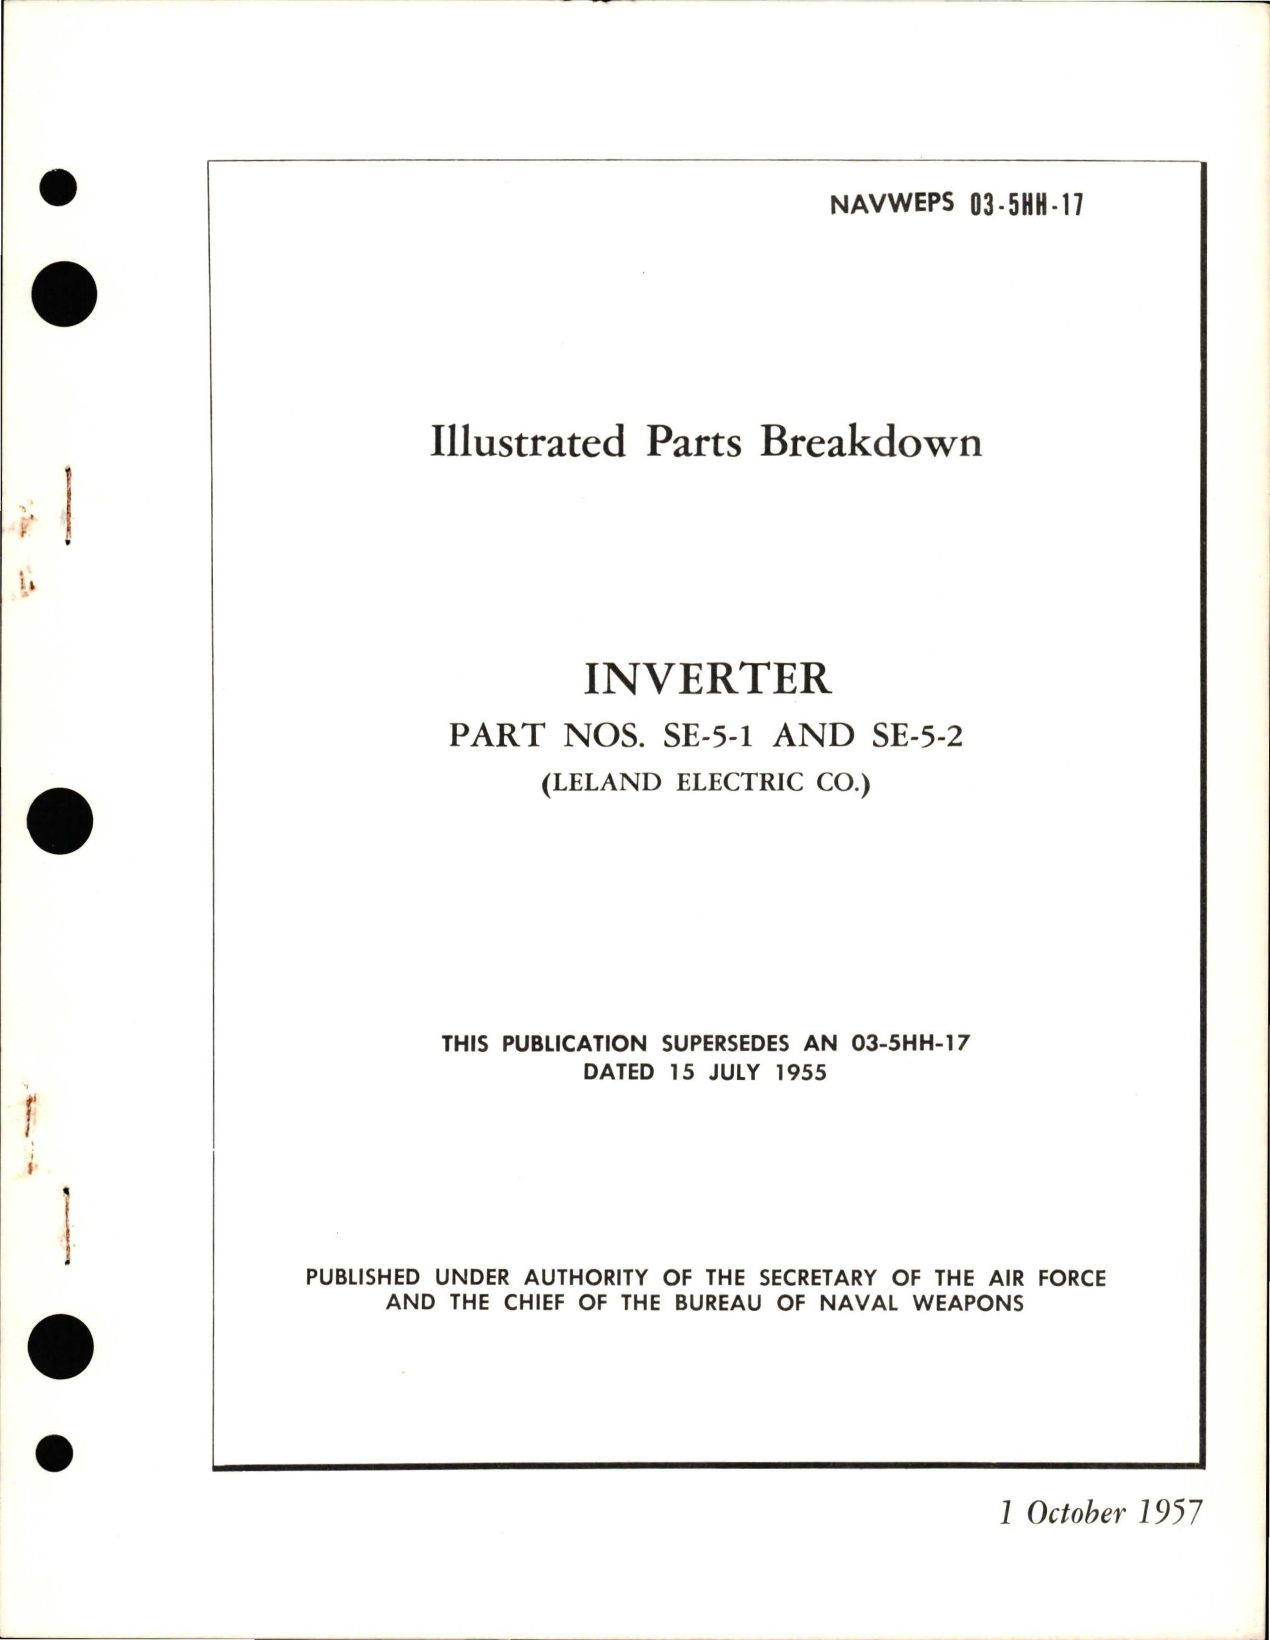 Sample page 1 from AirCorps Library document: Illustrated Parts Breakdown for Inverter - Parts SE-5-1 and SE-5-2